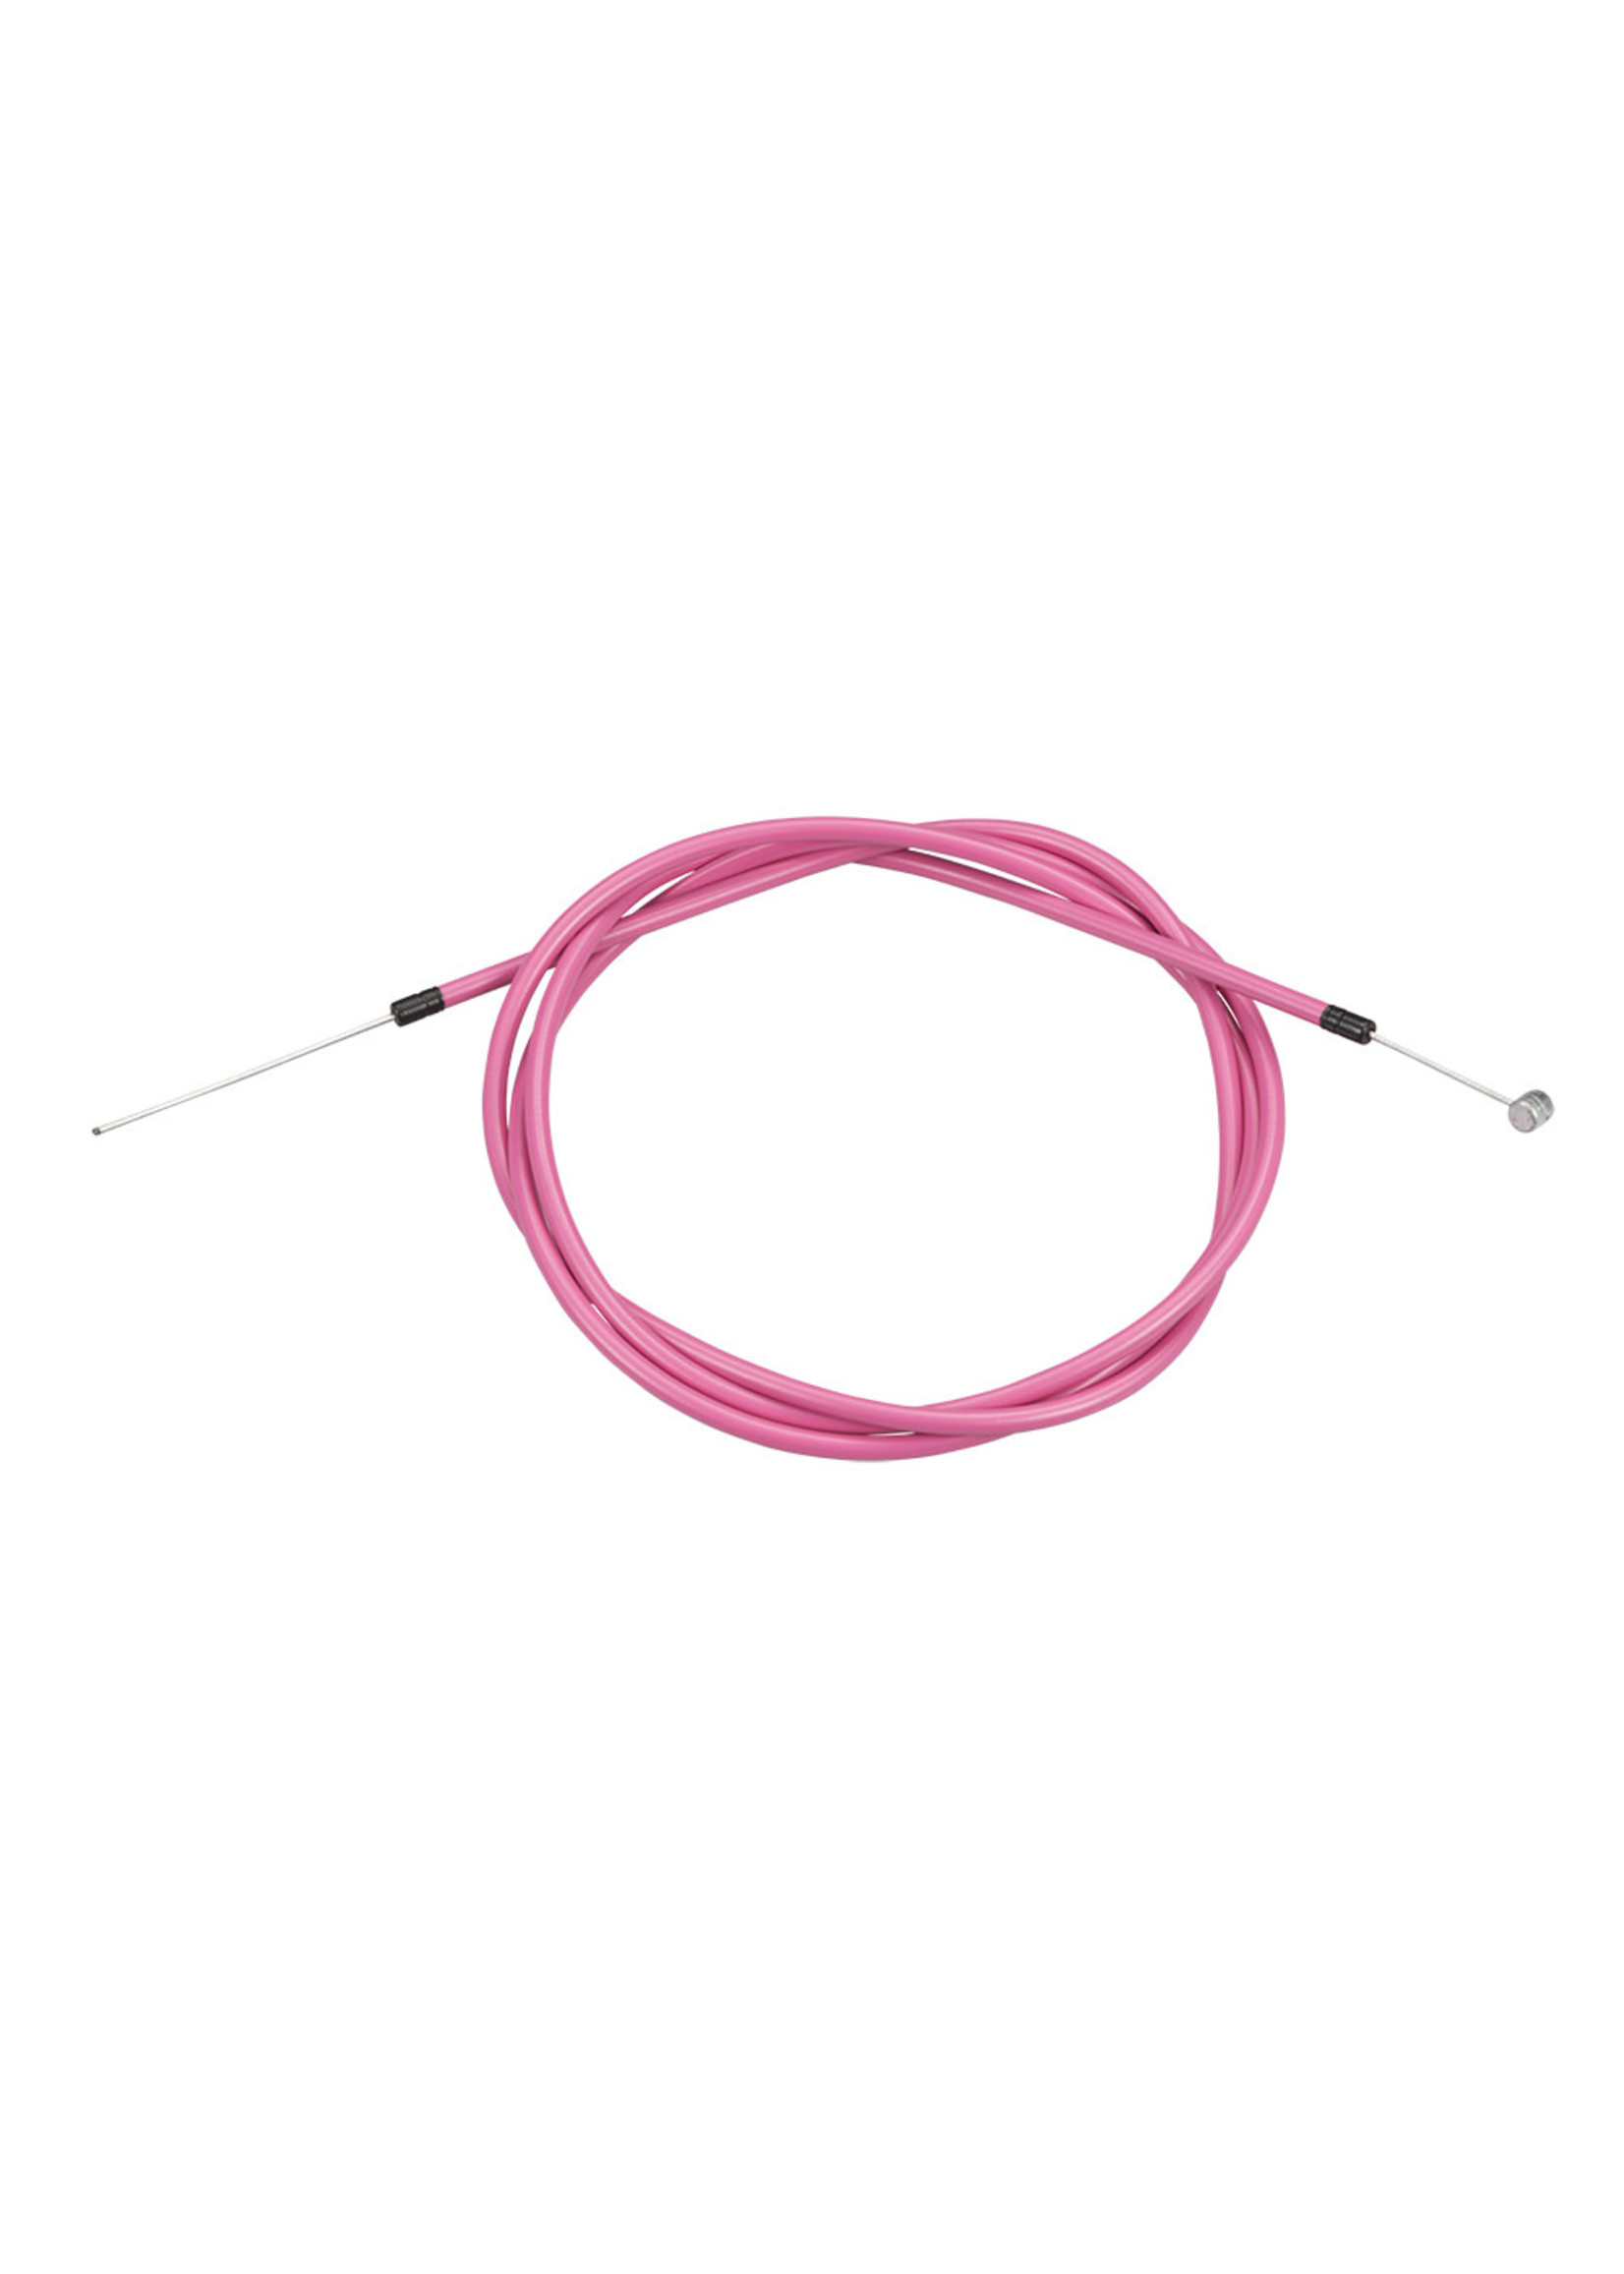 INSIGHT BRAKE CABLE PINK